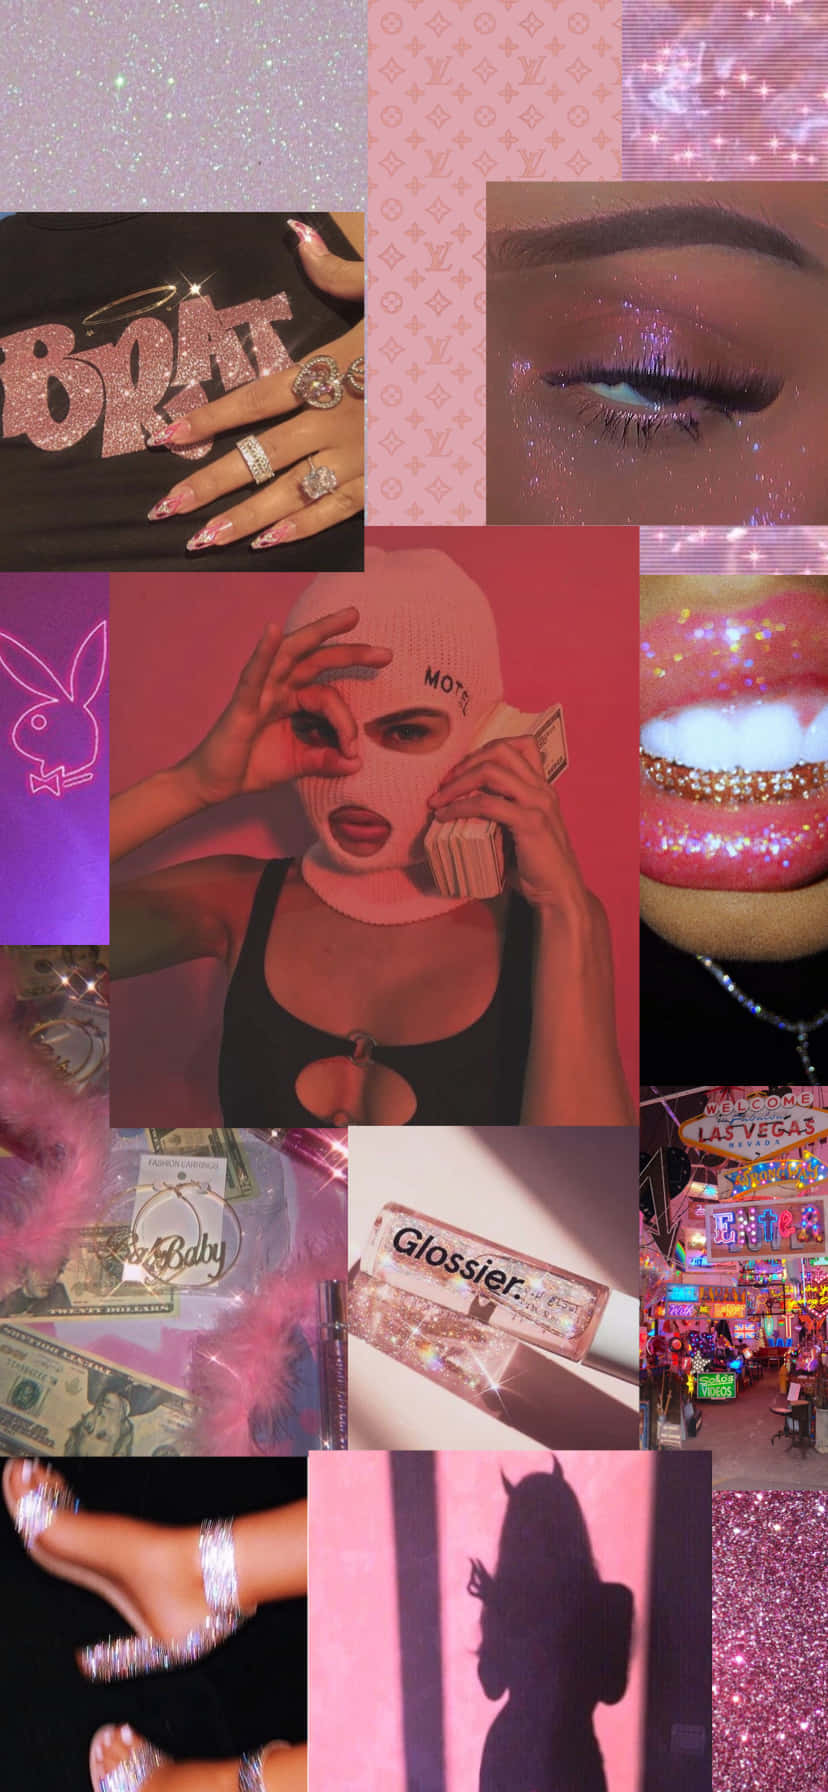 A Collage Of Pictures Of People With Pink Makeup